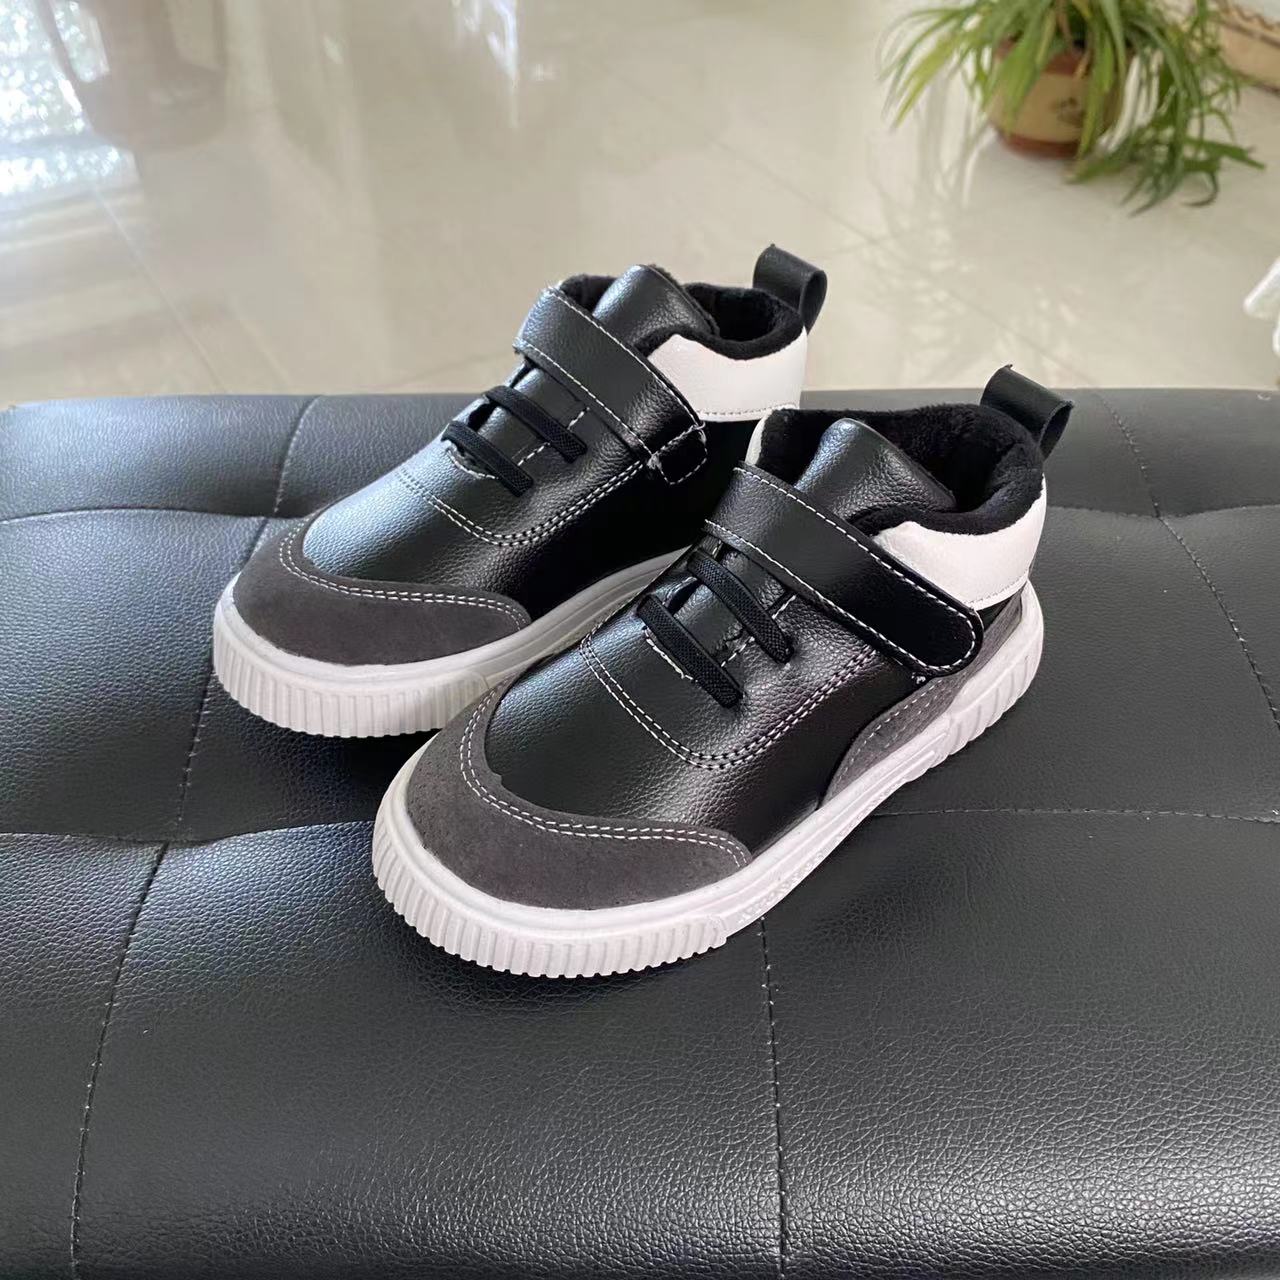 2022-New-Fashion-Baby-Casual-Shoes-Kids-Autumn-Boy-Sneakers-Shoe-Toddler-Pu-Leather-Children-Shoe-5